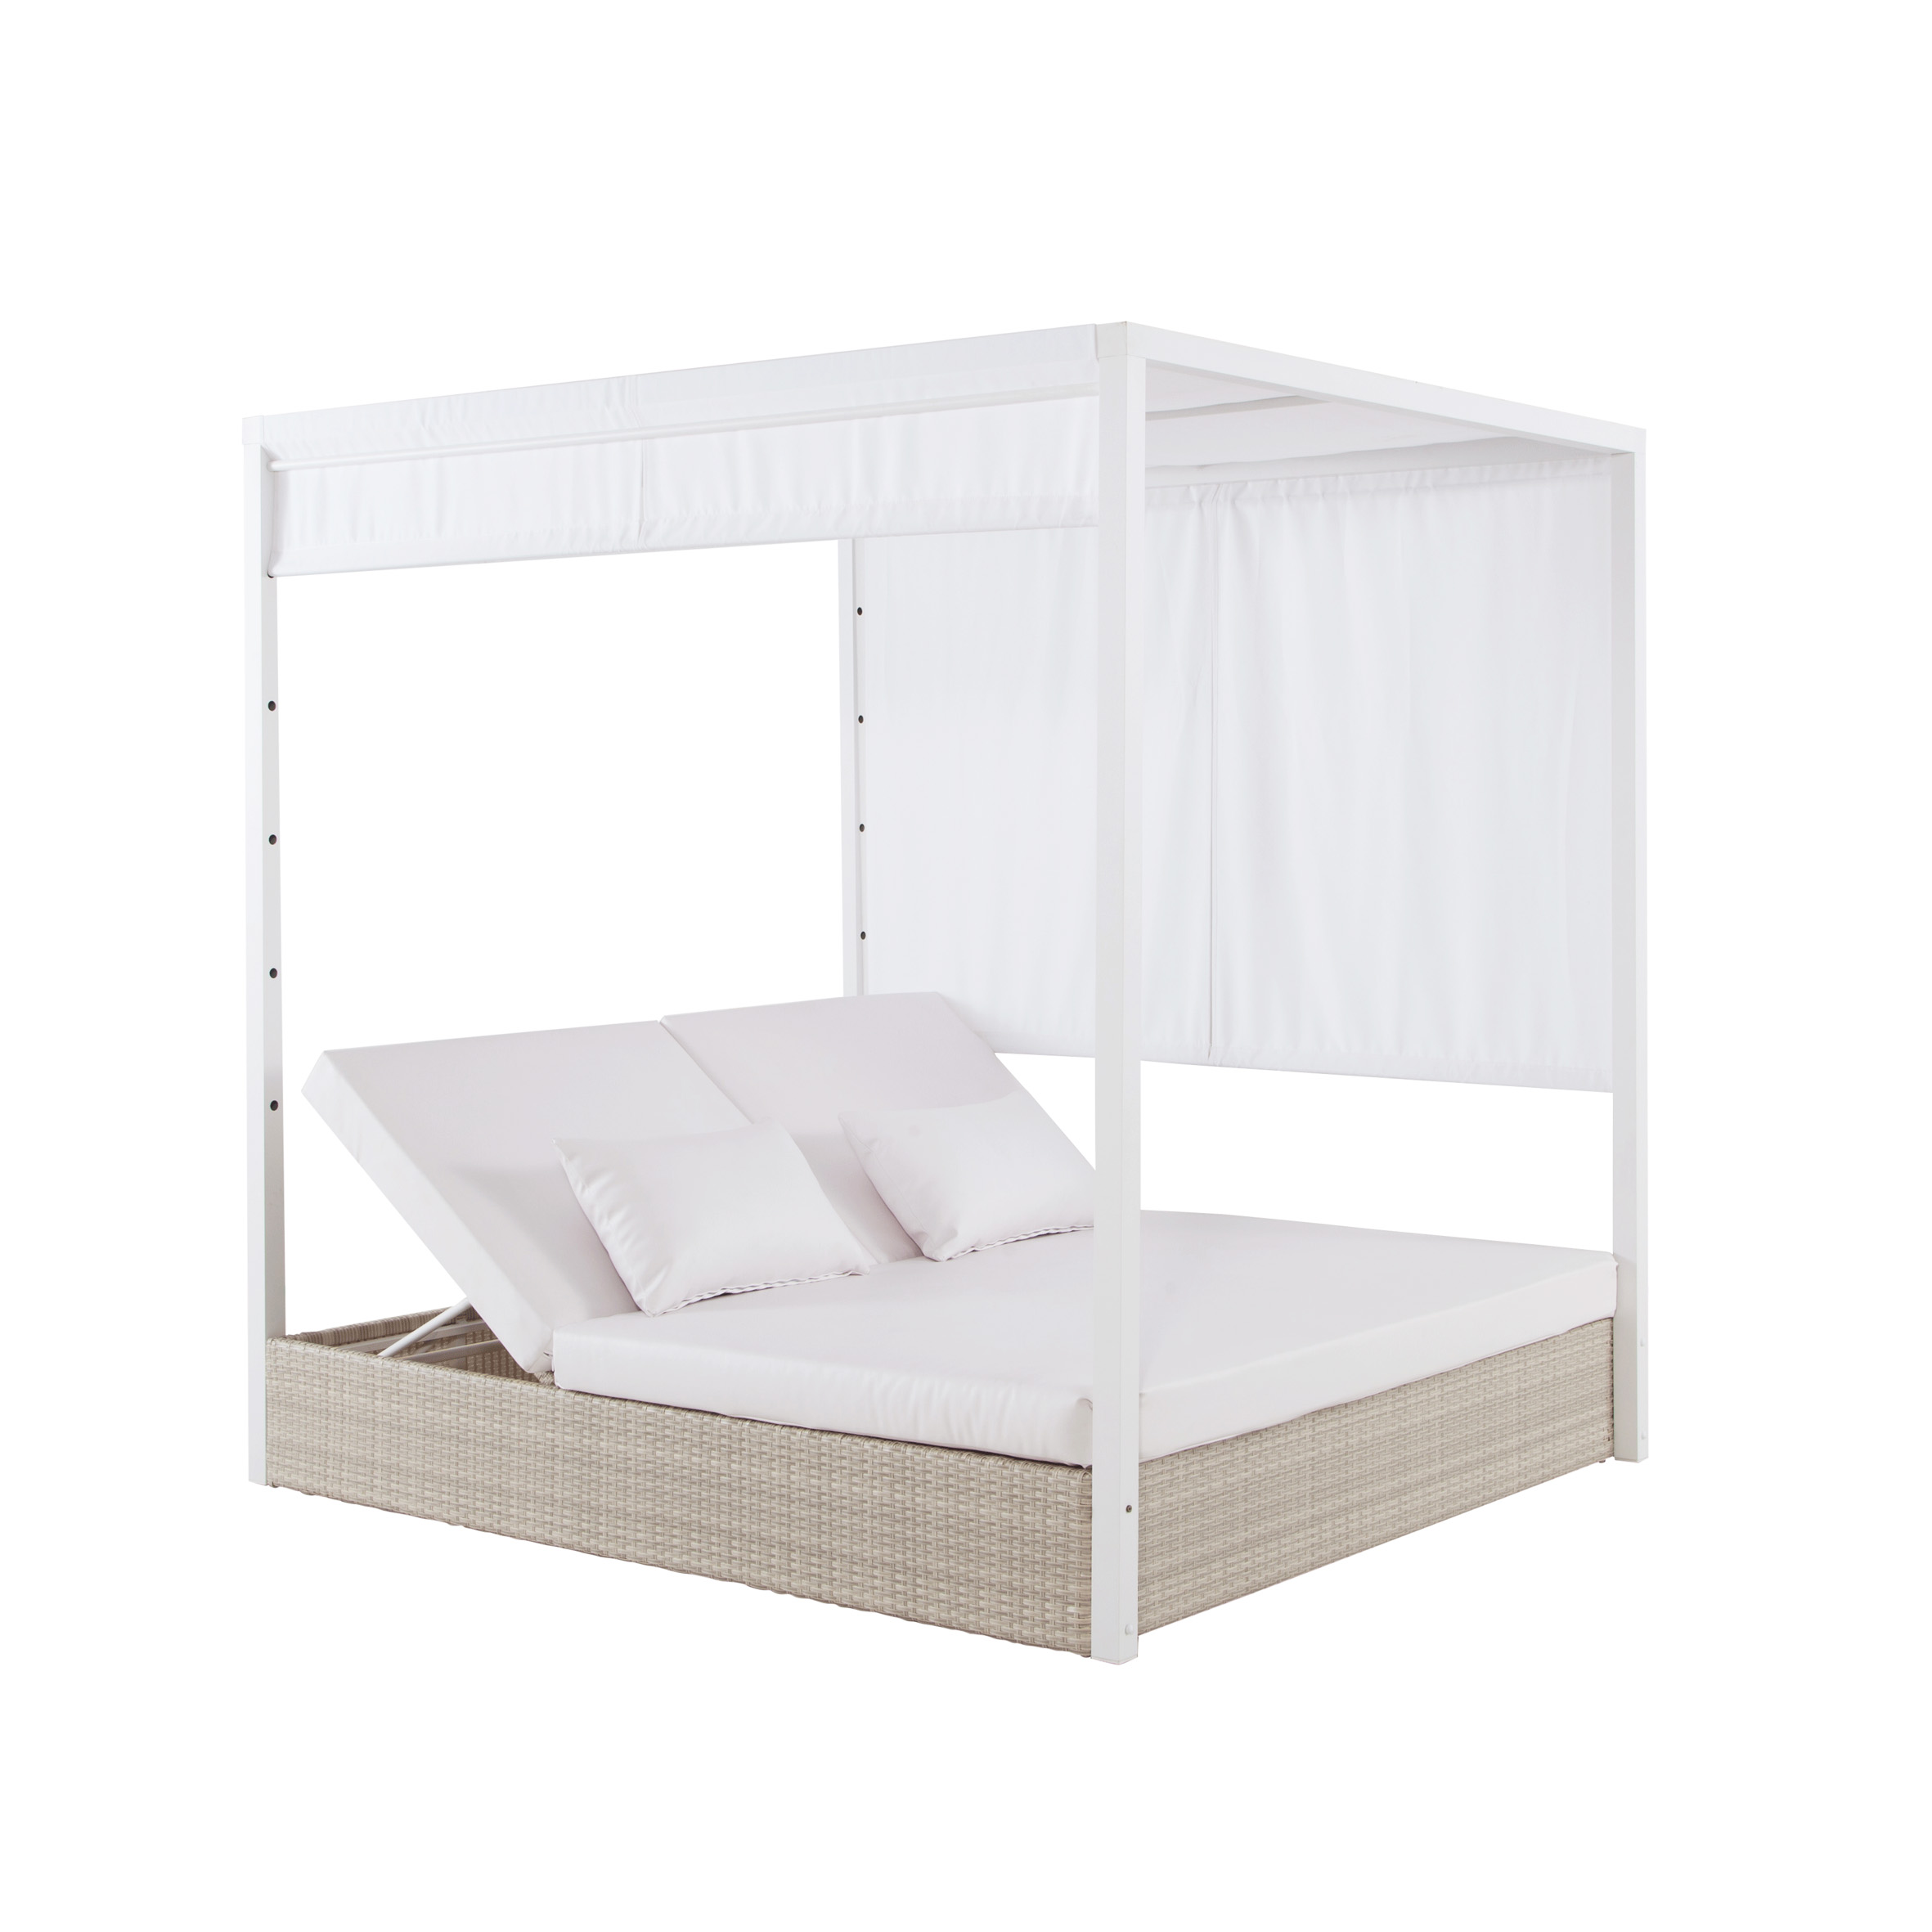 Anahera rattan daybed with curtain Featured Image